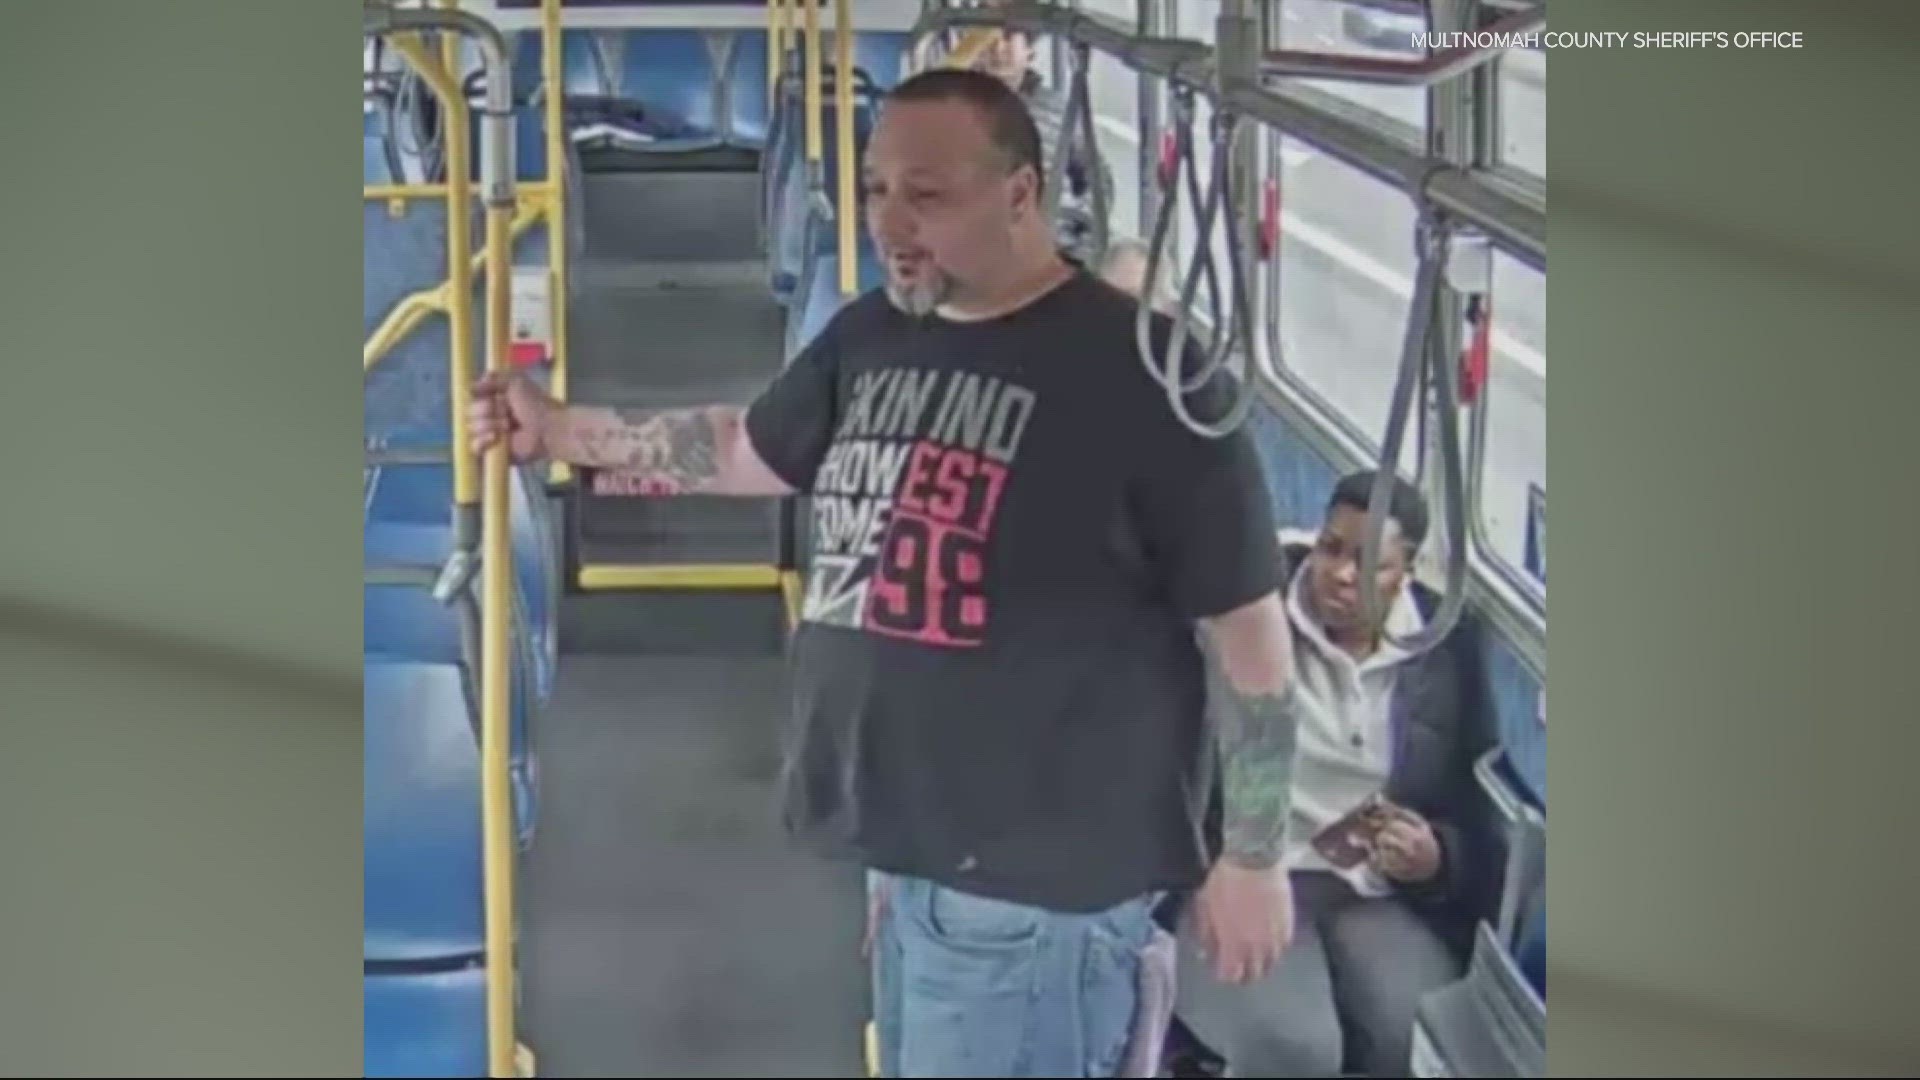 Oscar Ortiz said he was punched in the eyes, spat on his face and called a homophobic slur on a TriMet bus in Portland last month.